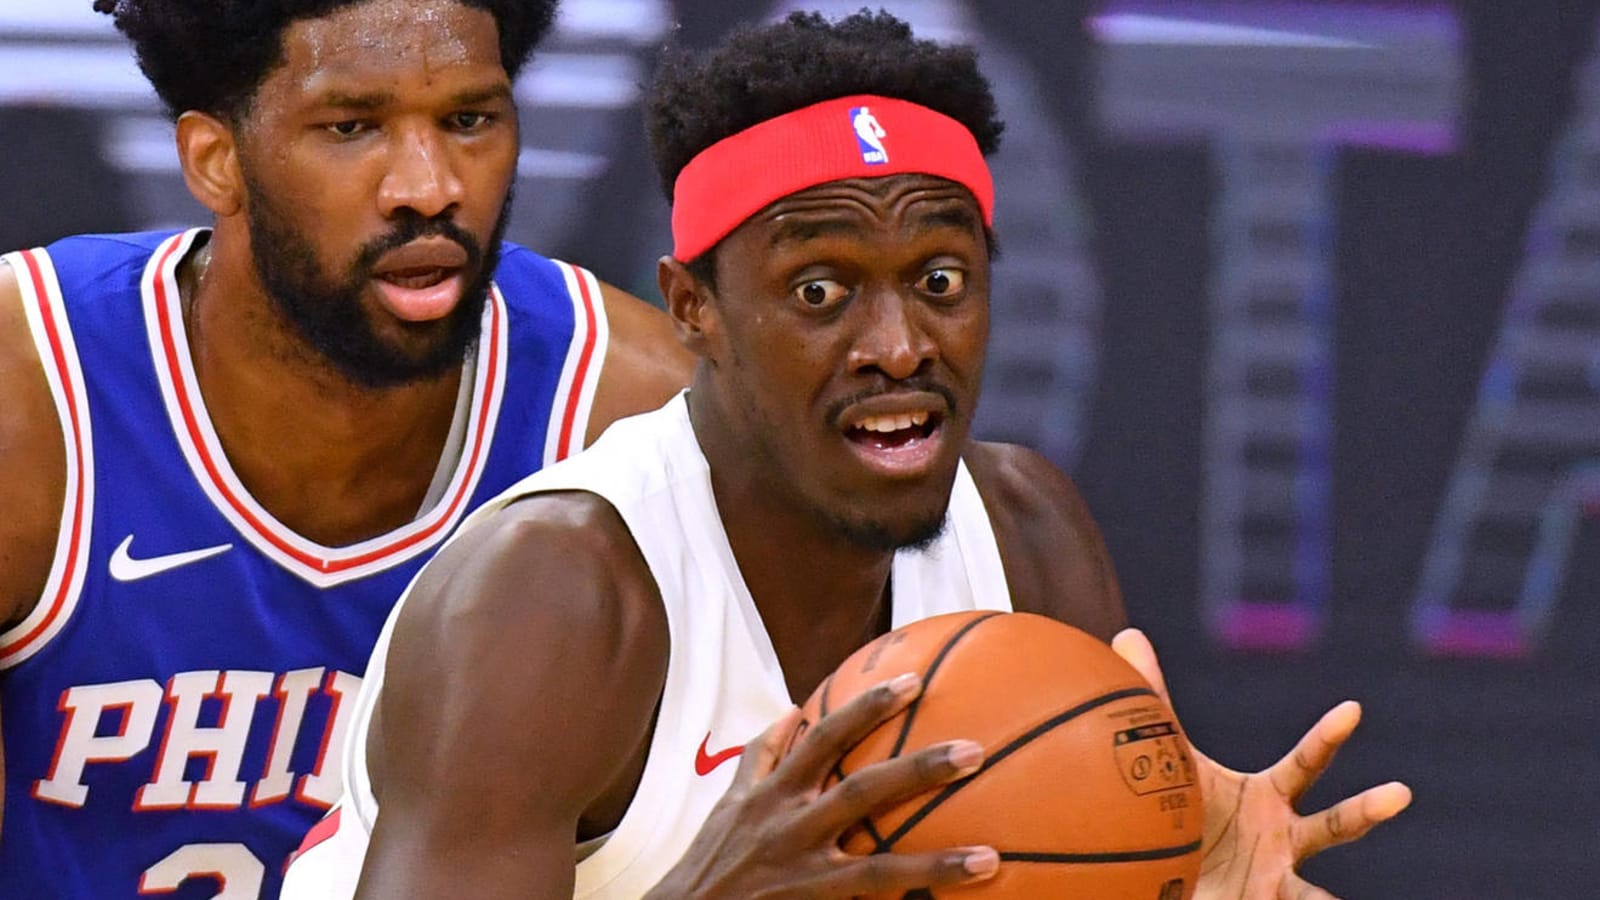 Pascal Siakam benched by Raptors as discipline for leaving floor early